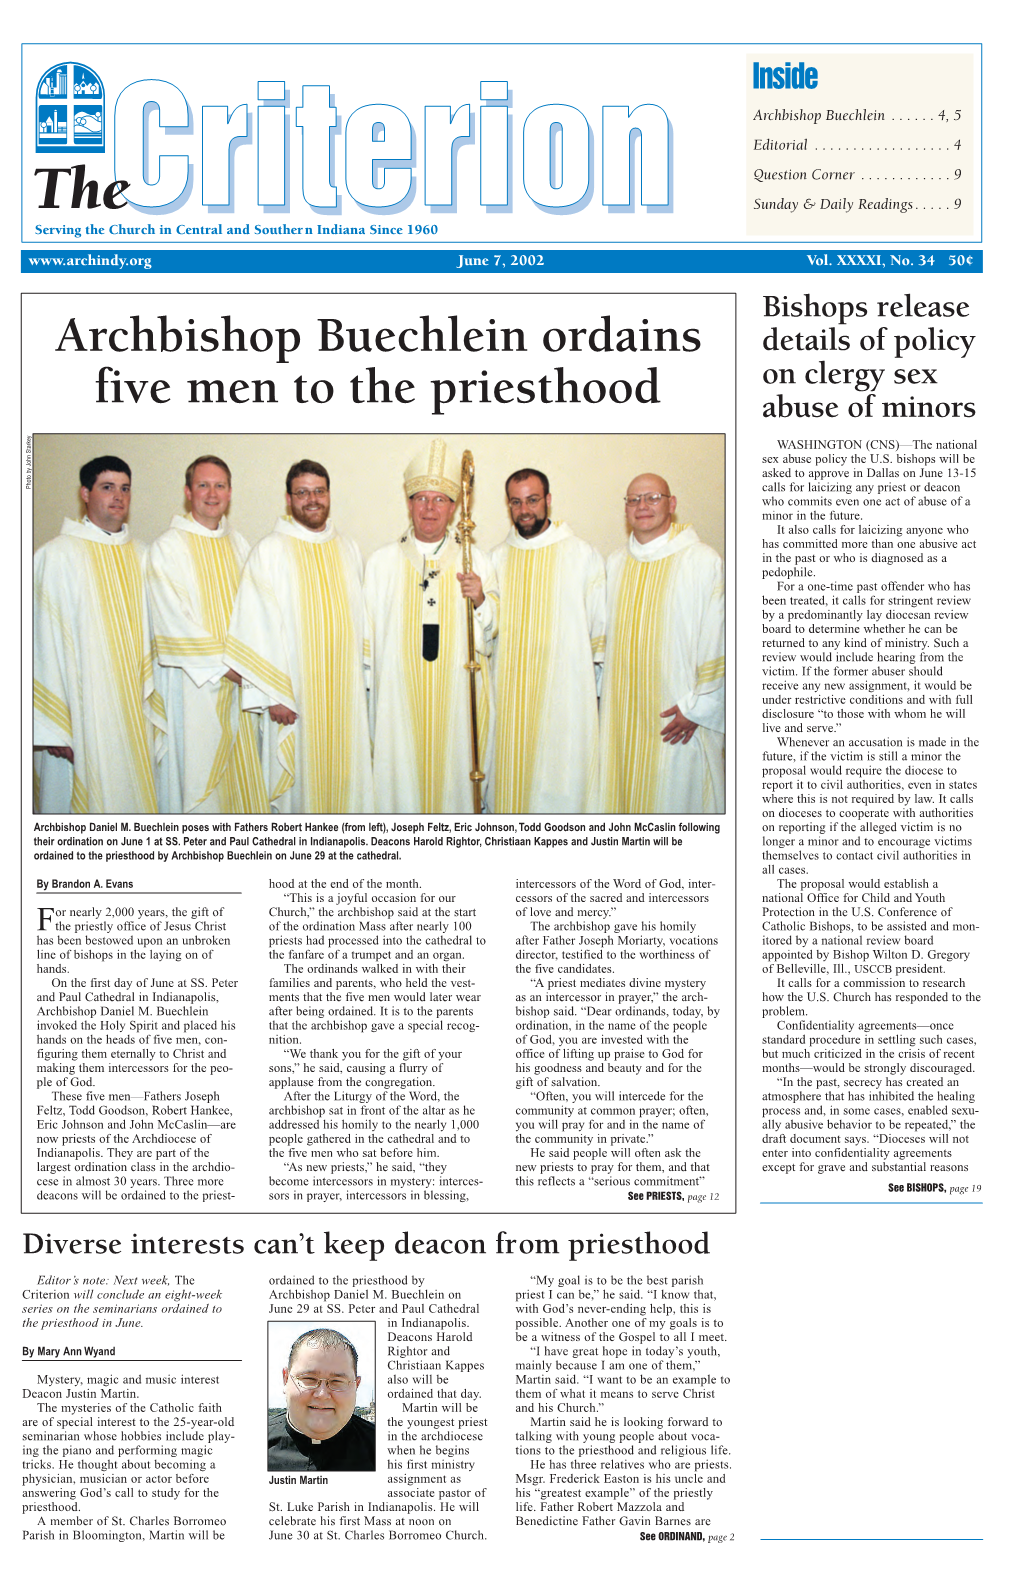 Archbishop Buechlein Ordains Five Men to the Priesthood